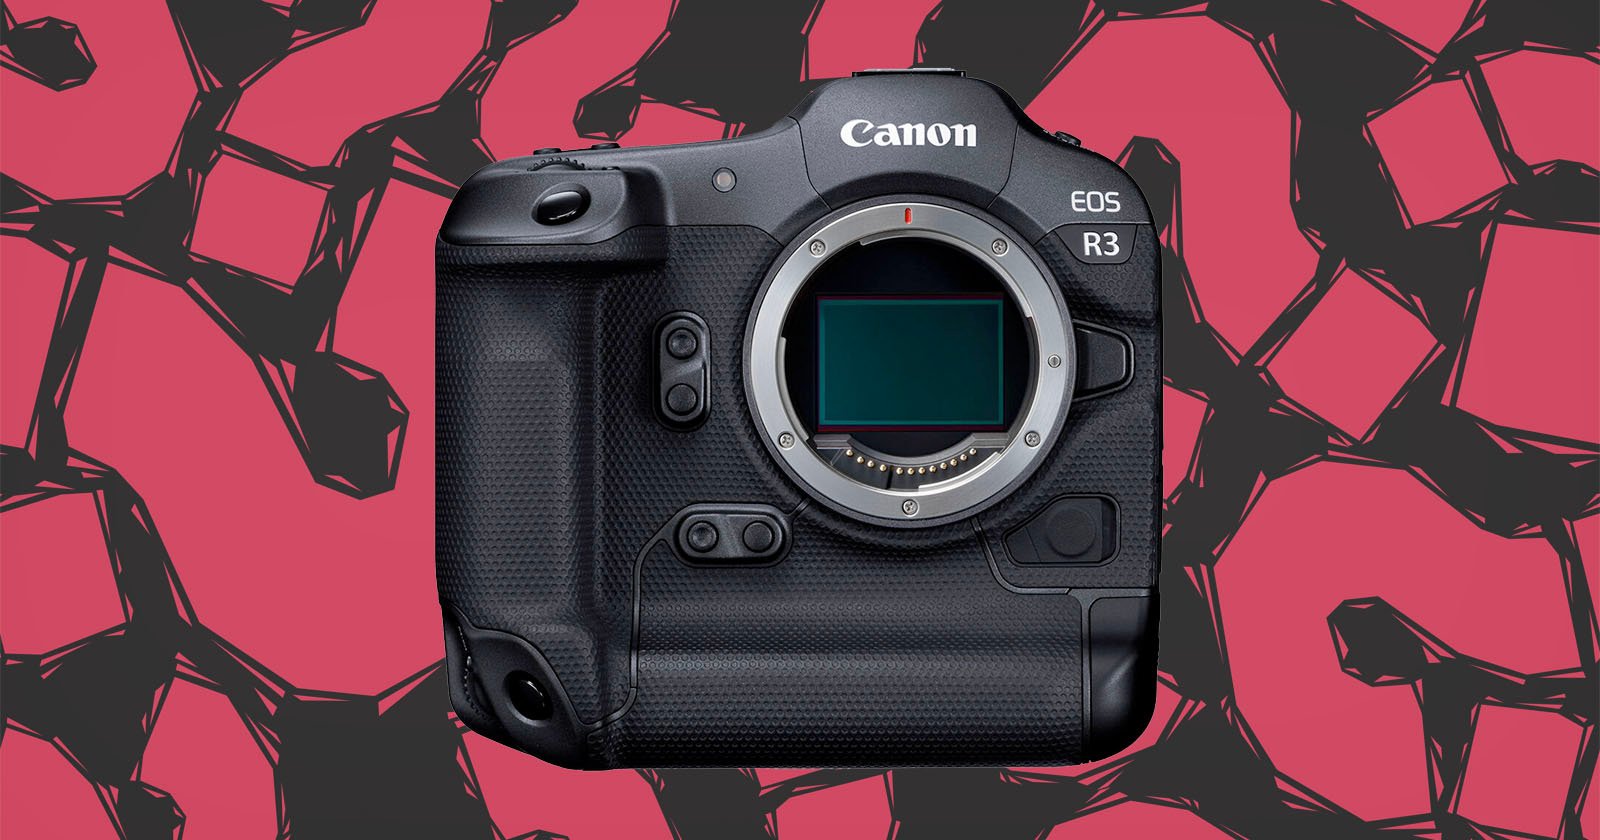 A Canon EOS R3 camera body is centered against a background of abstract black geometric shapes on a red backdrop. The camera has a compact, rugged design with intricate details around the lens mount and various buttons and dials visible.